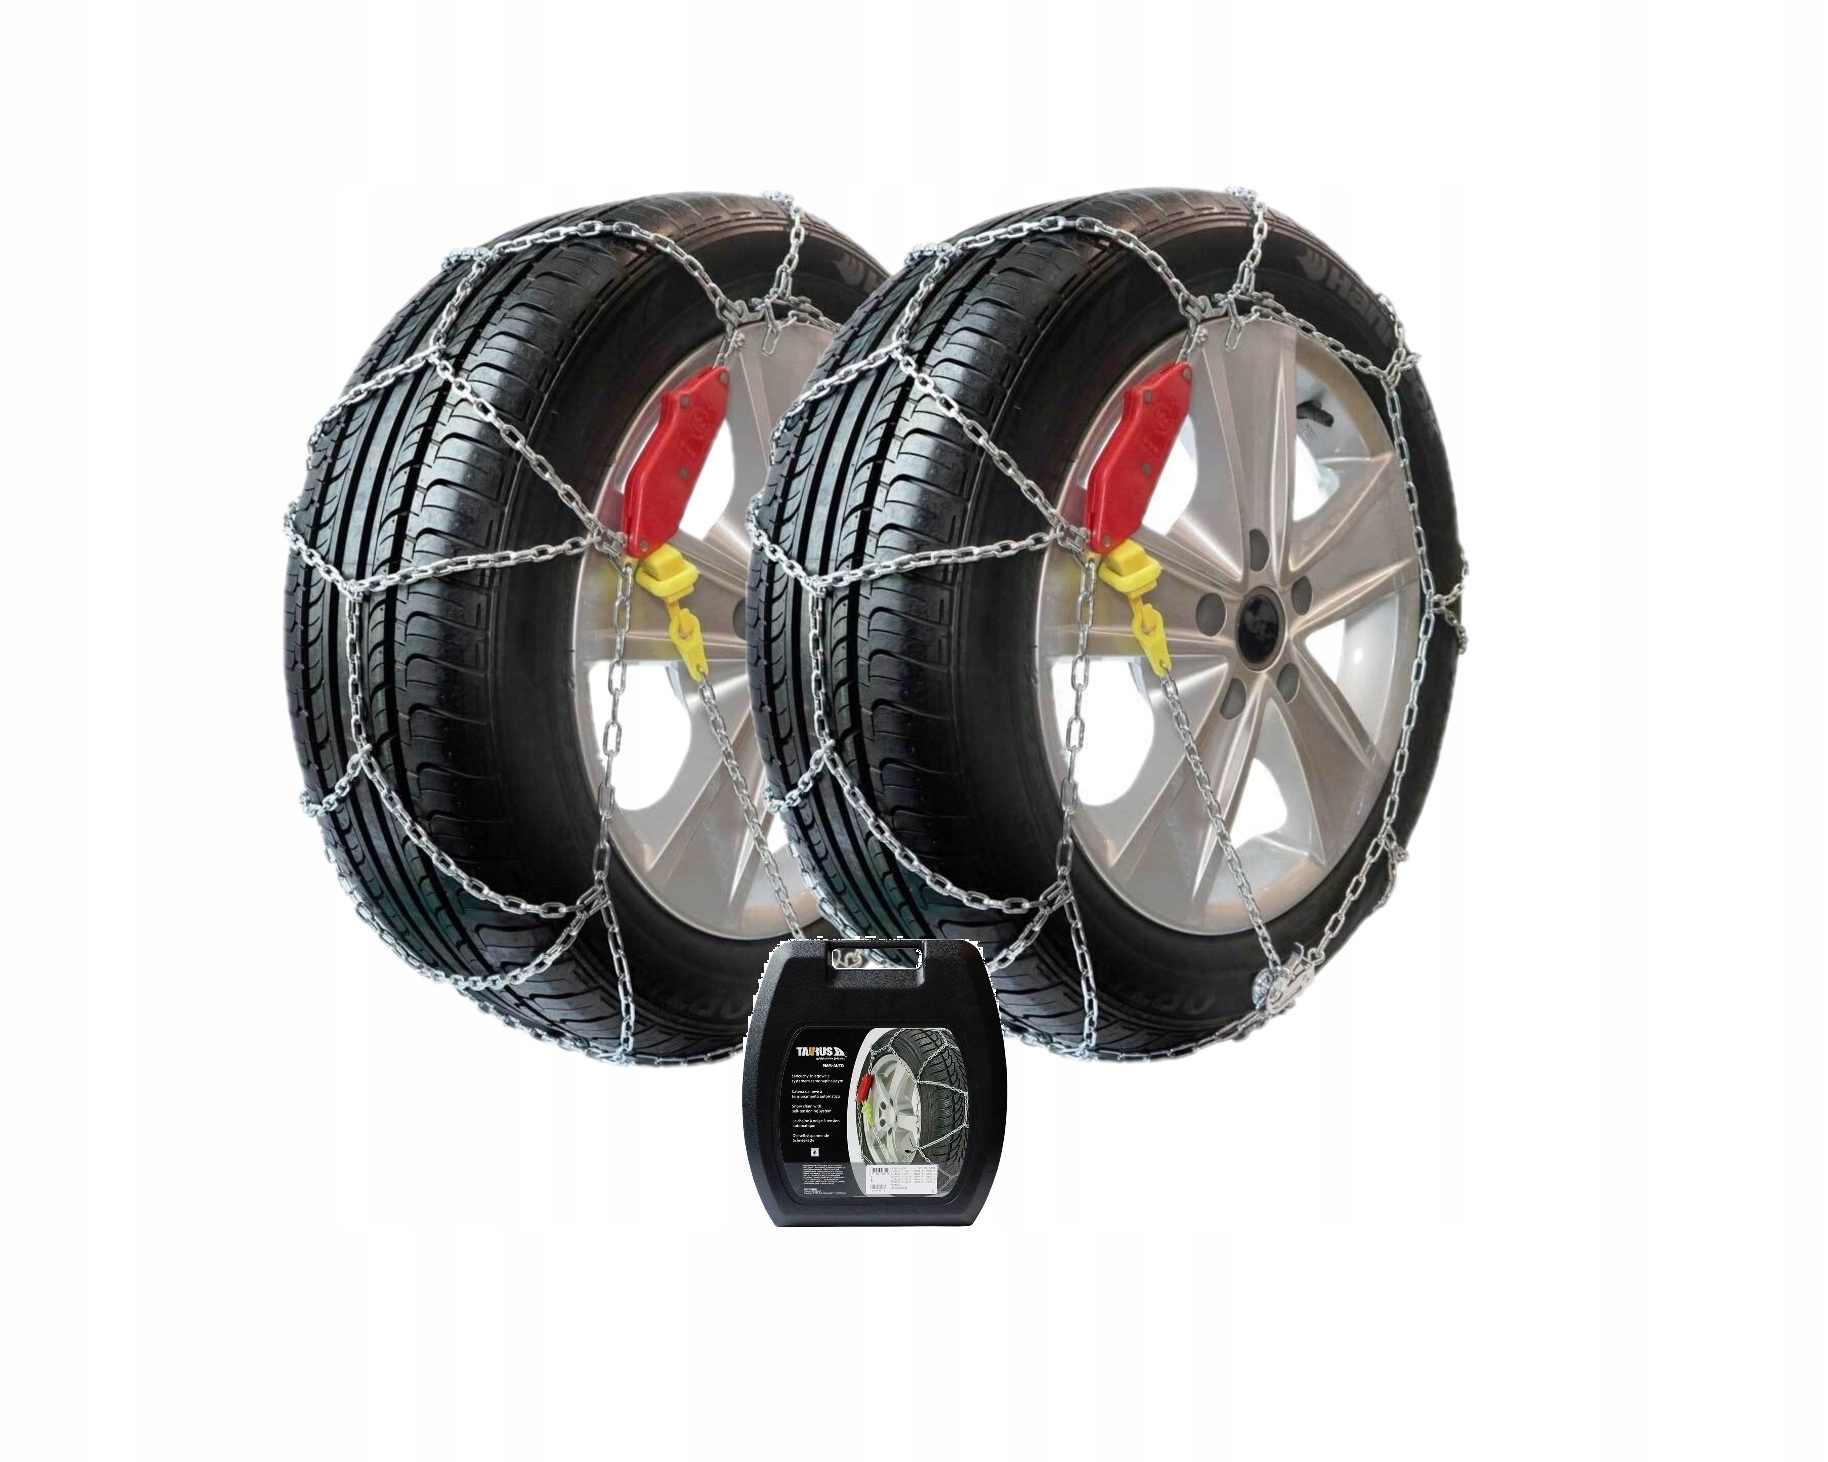 COMPASS Snow Chains 12 mm for Tyres 235/55 R19 ÖNORM, TÜV Tested